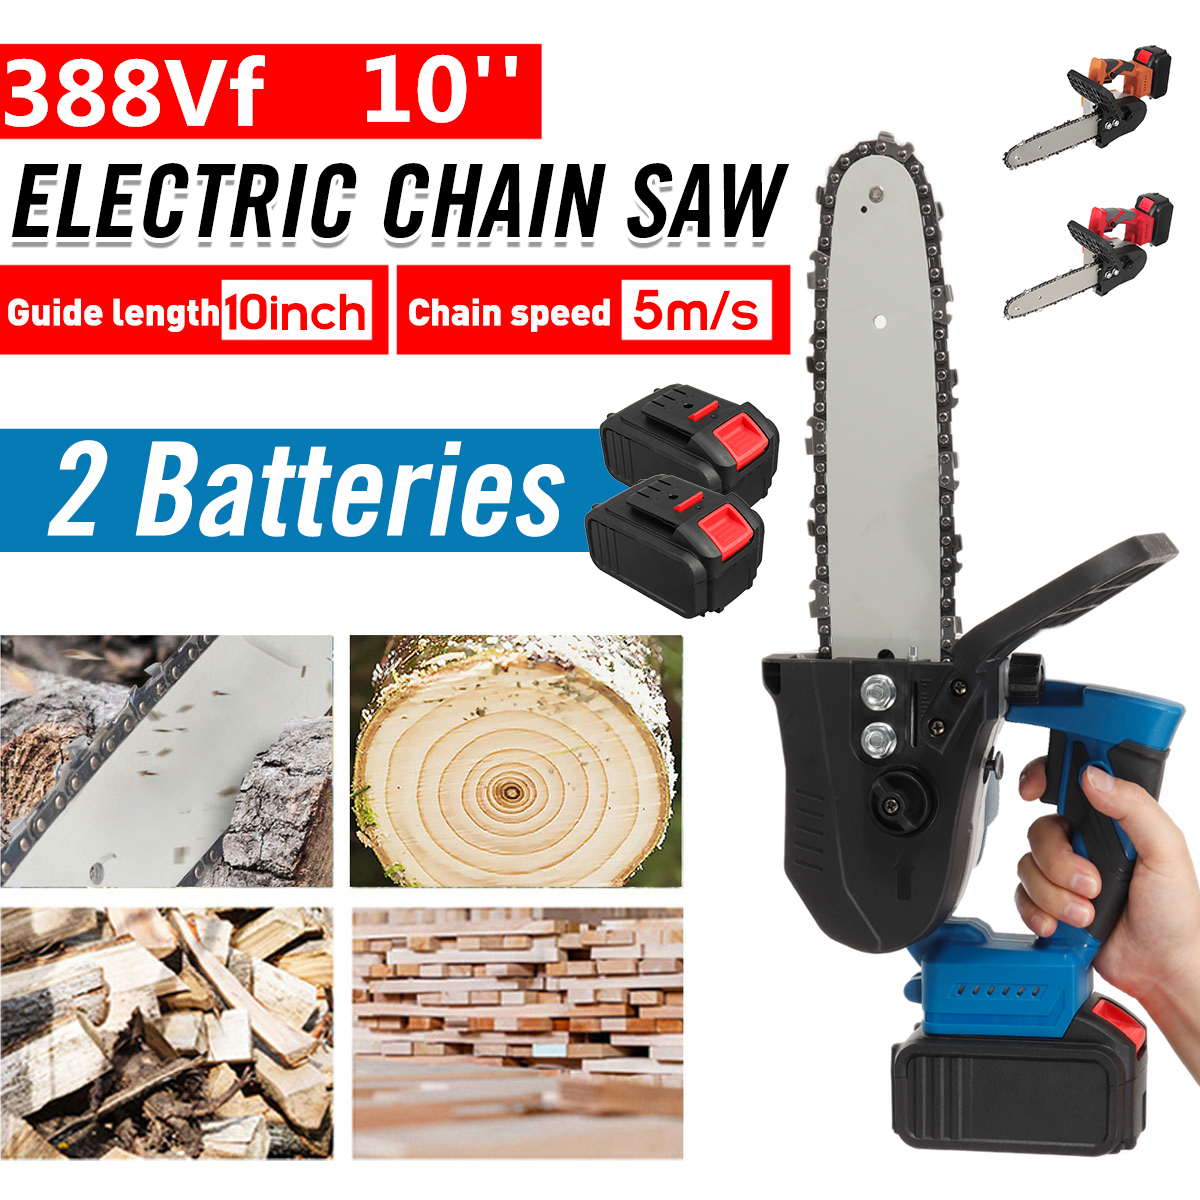 10in-Rechargeable-Brushless-Electric-Chain-Saw-One-Hand-Saw-Woodworking-Wood-Cutter-W-1-or-2-pcs-Bat-1851012-2